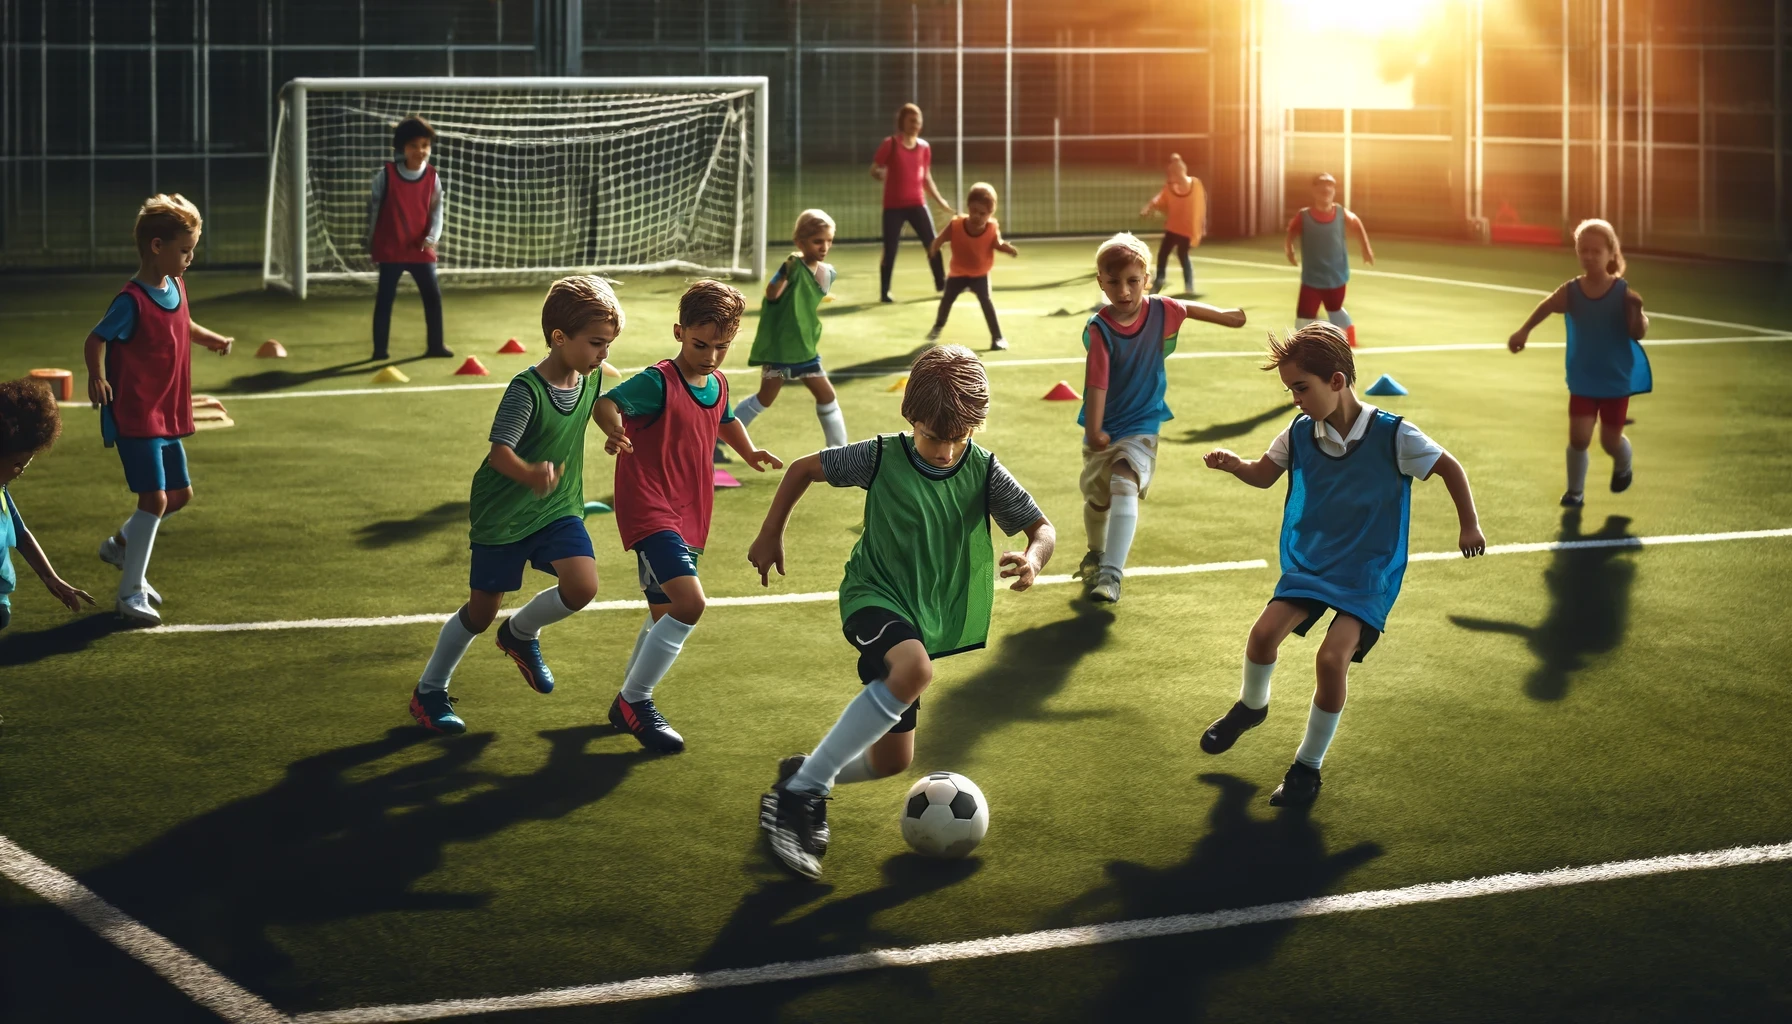 small sided games in youth soccer